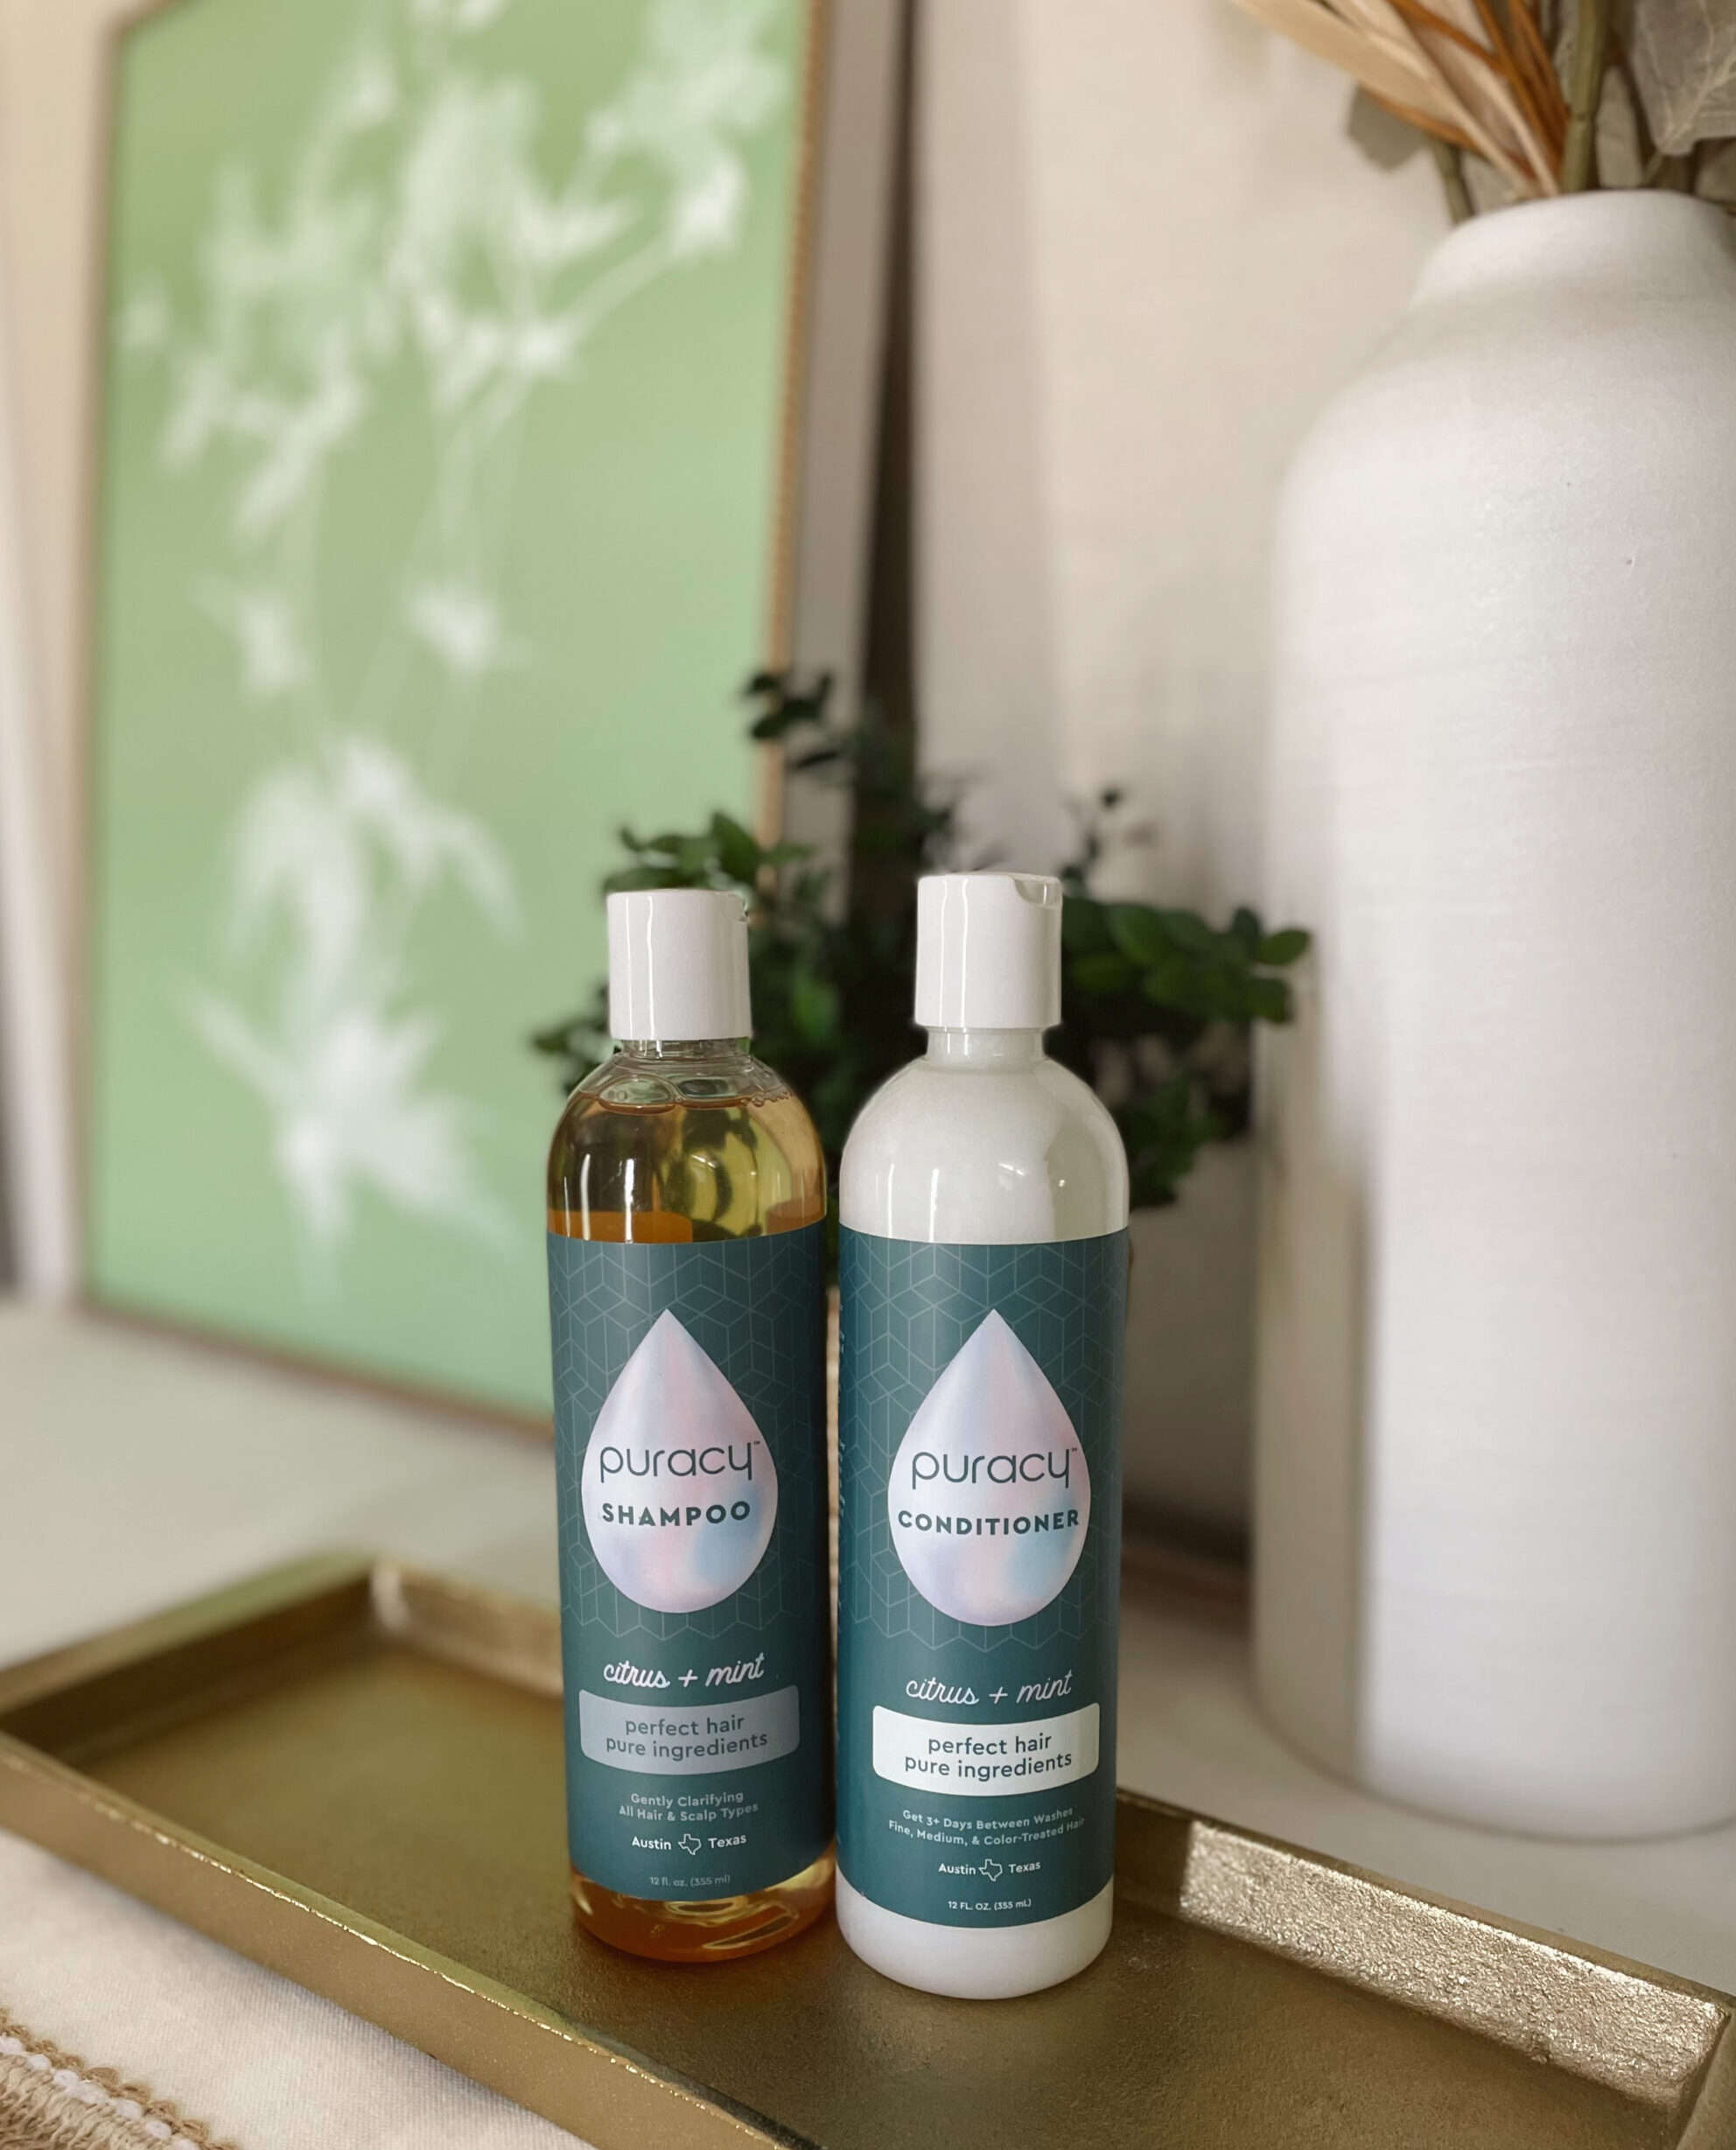 Puracy Shampoo and Conditioner for Oily Scalp - Affordable by Amanda, Summer Hair Care Routine